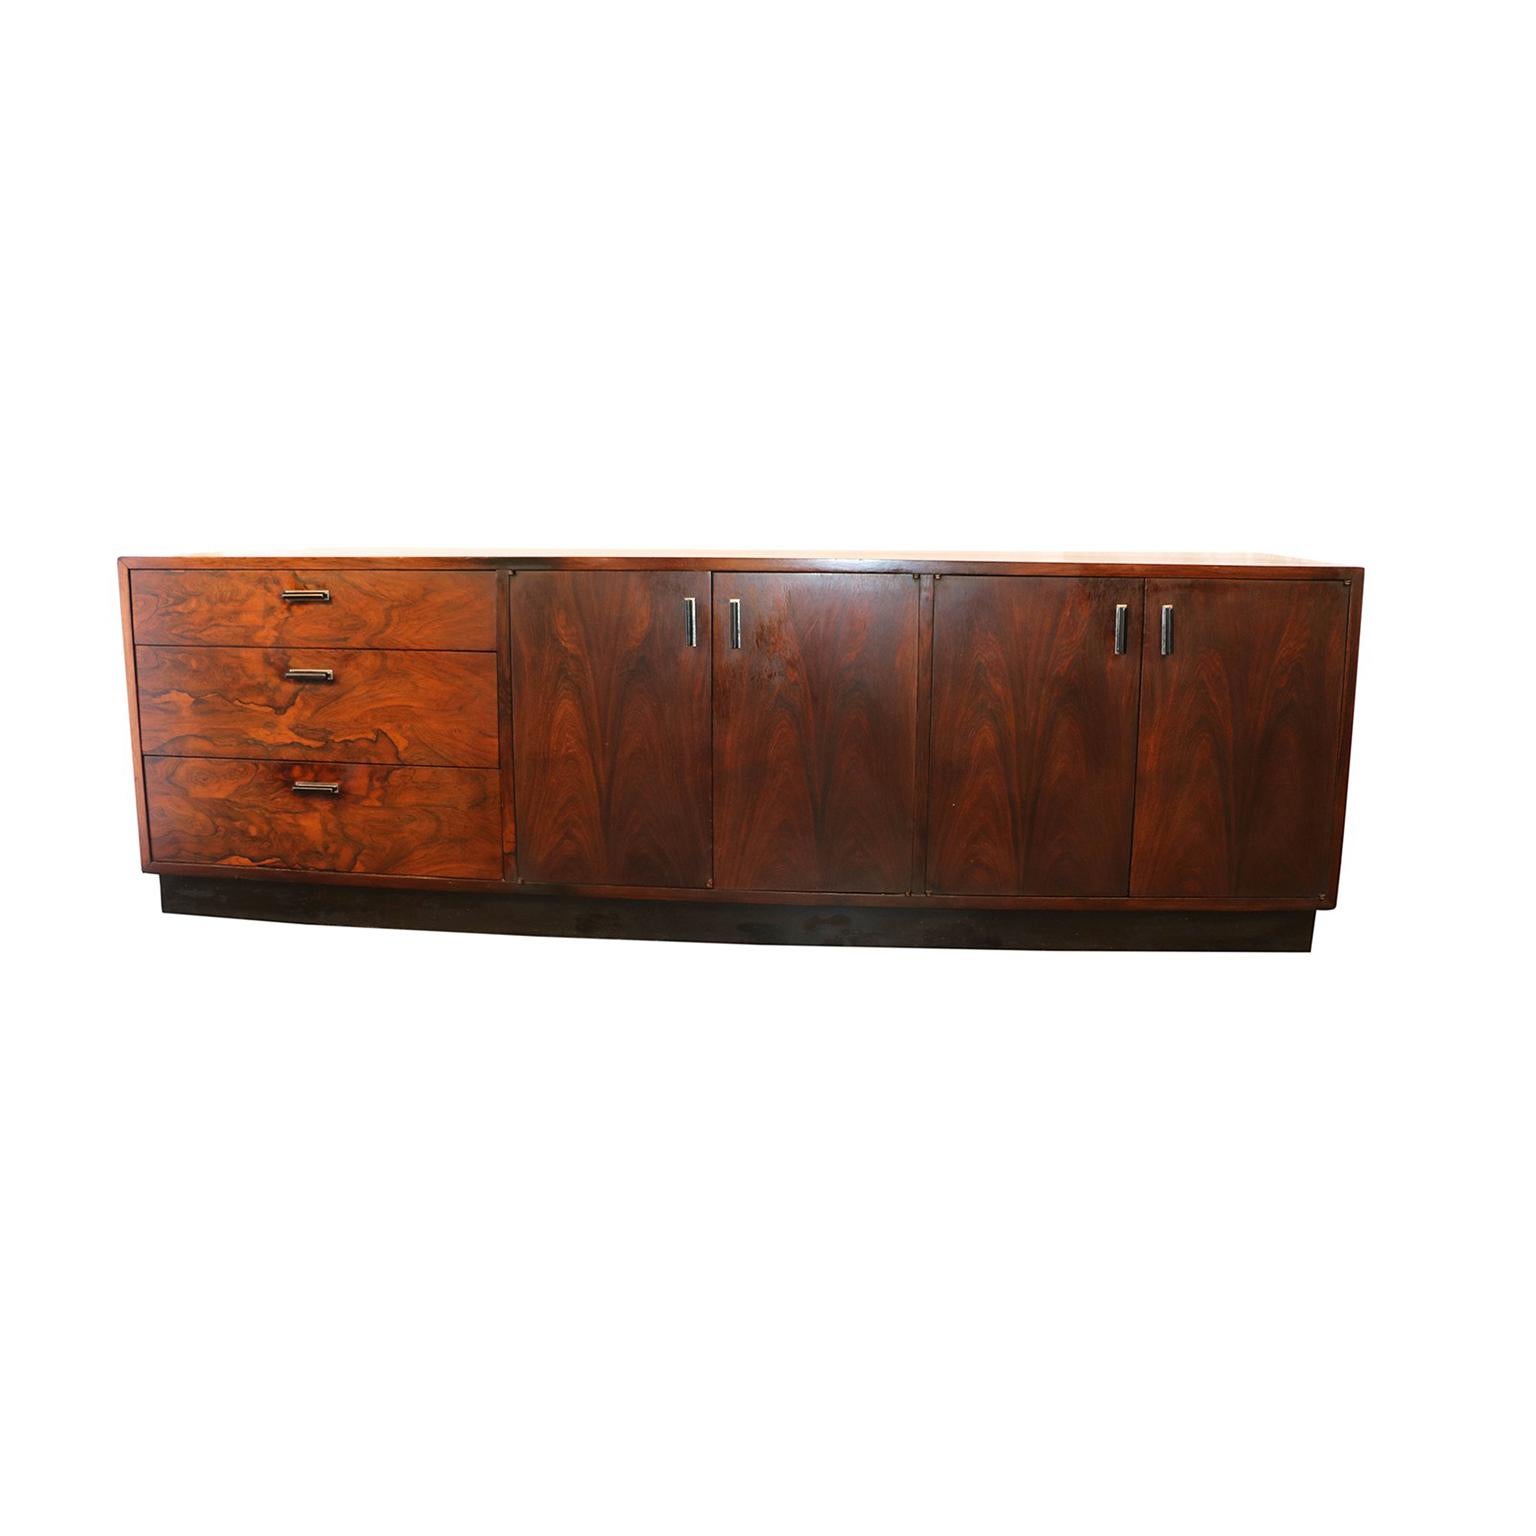 This gorgeous remarkable low sideboard dresser in the style of Milo Baughman is a very high-quality work, crafted with deep color and gorgeous flowing grains. Features a selection of brilliant Brazilian Rosewood veneer throughout. Very well made,